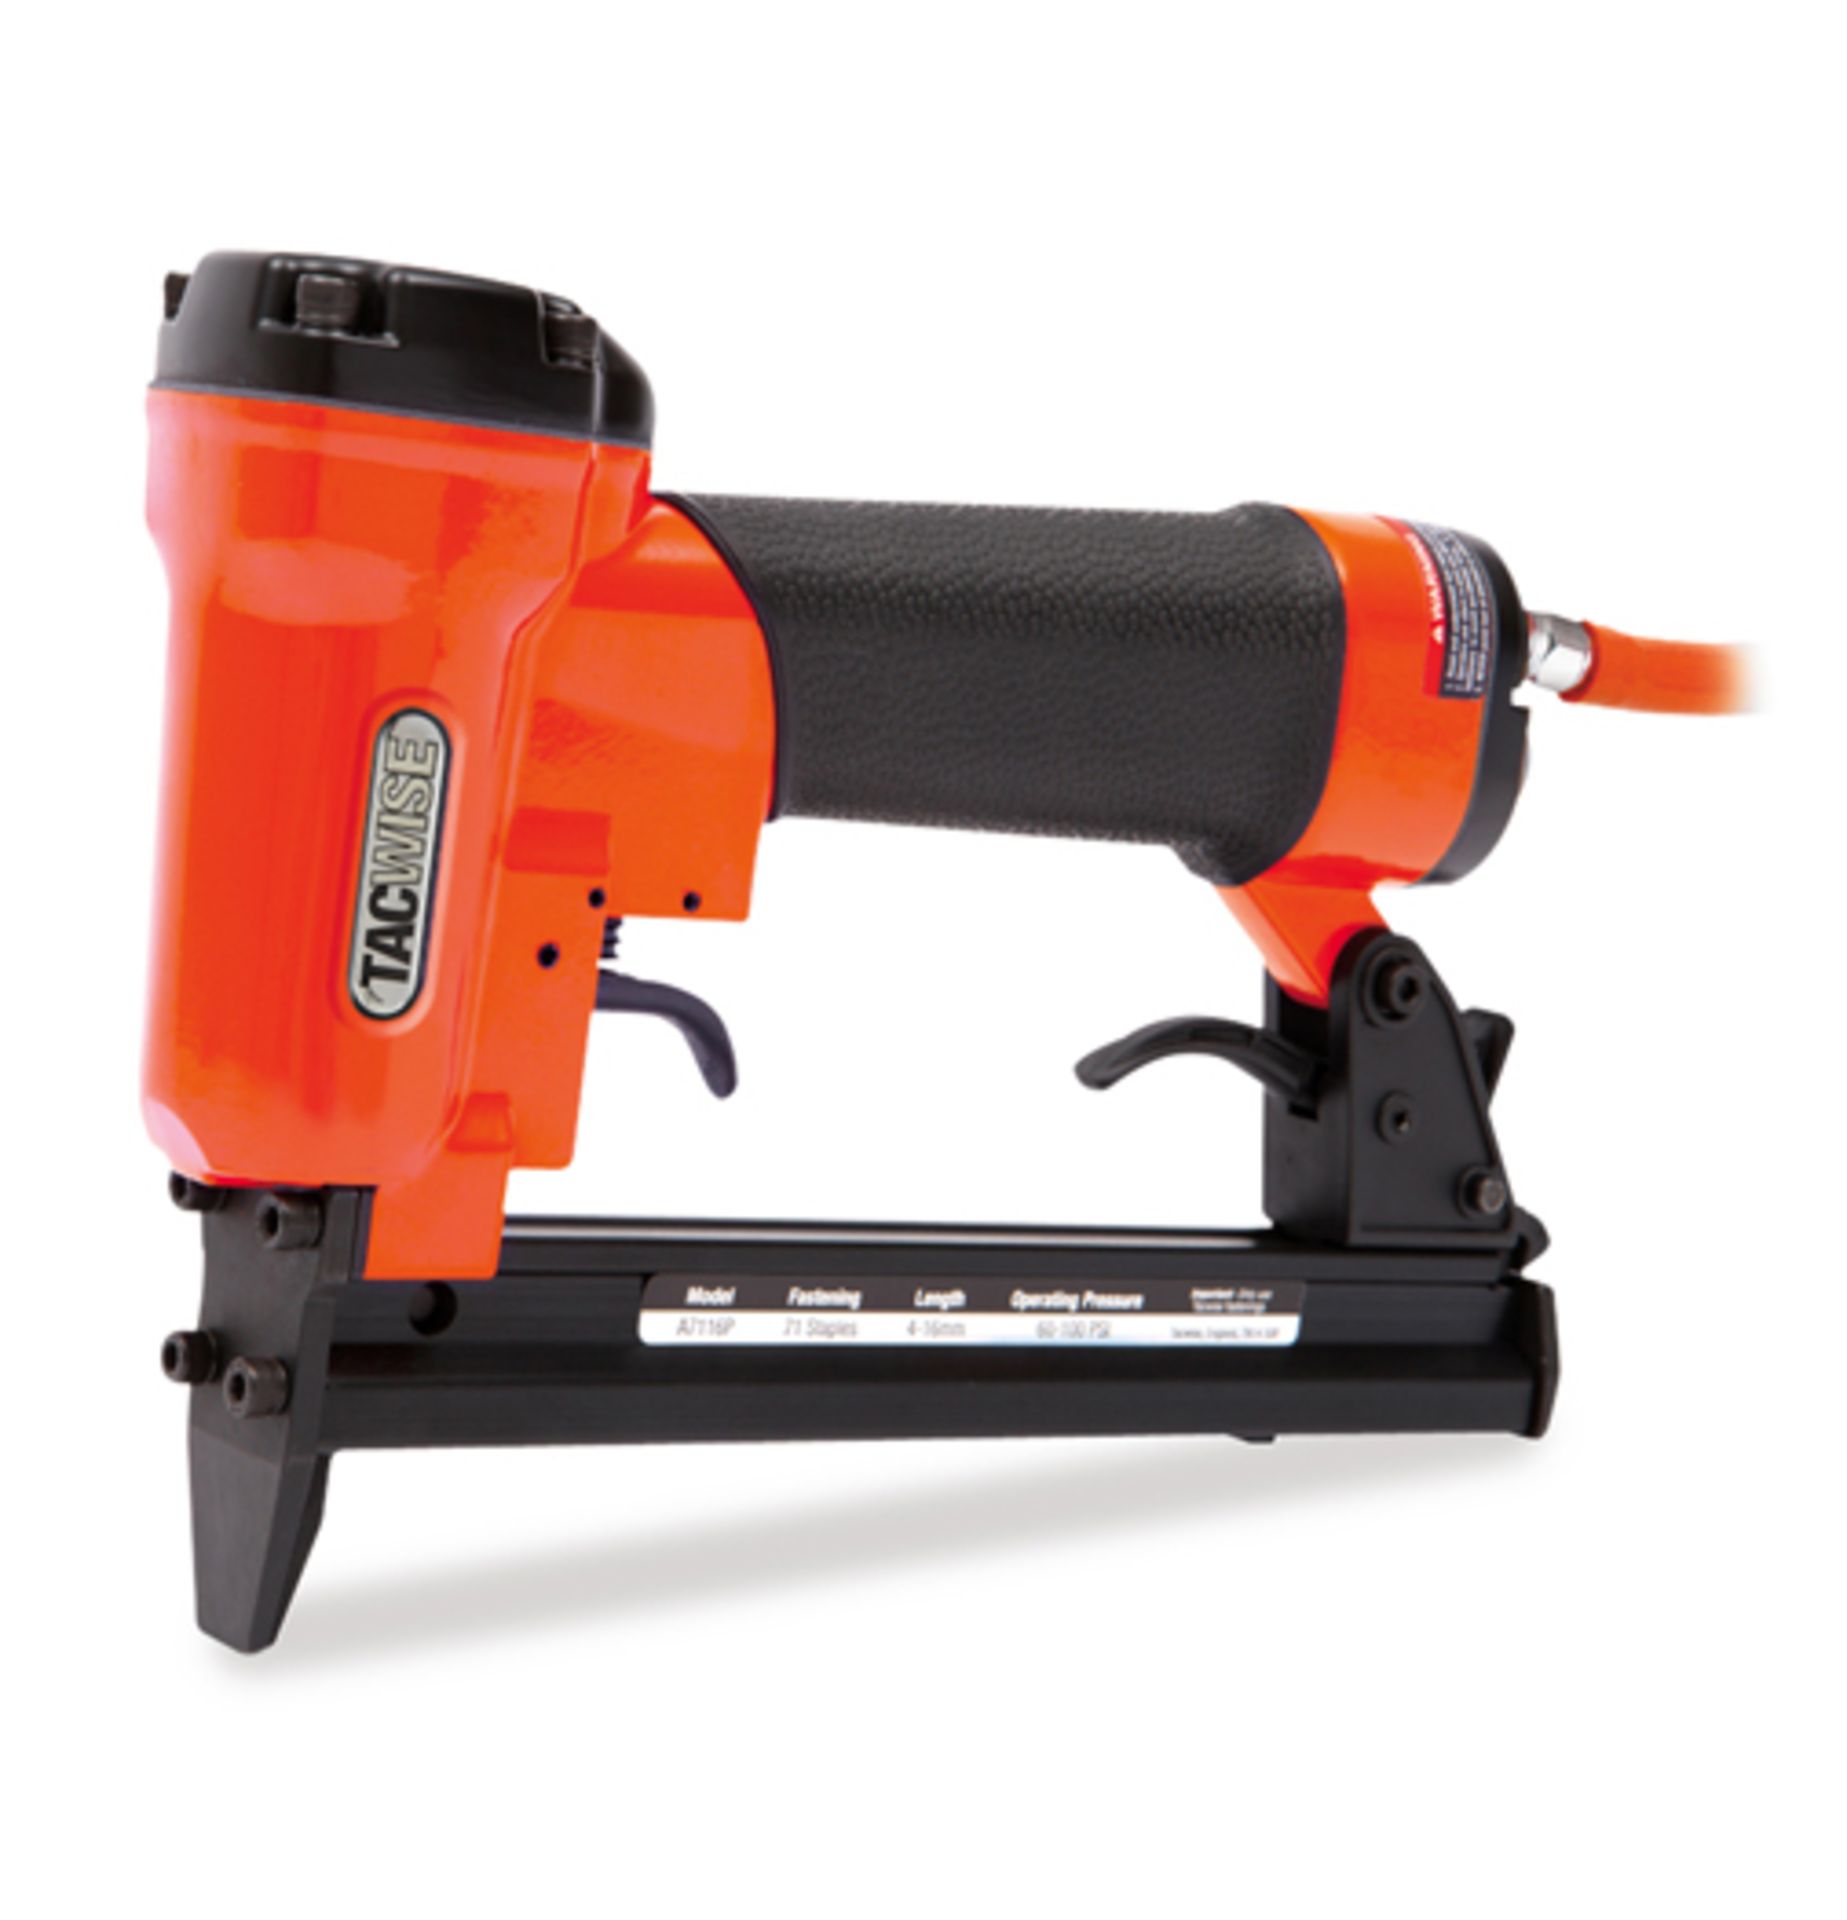 1 x Tacwise Rapesco FCF15XCB Air Corrugated Fastener Gun - Capable of Countersinking 9mm to 15mm